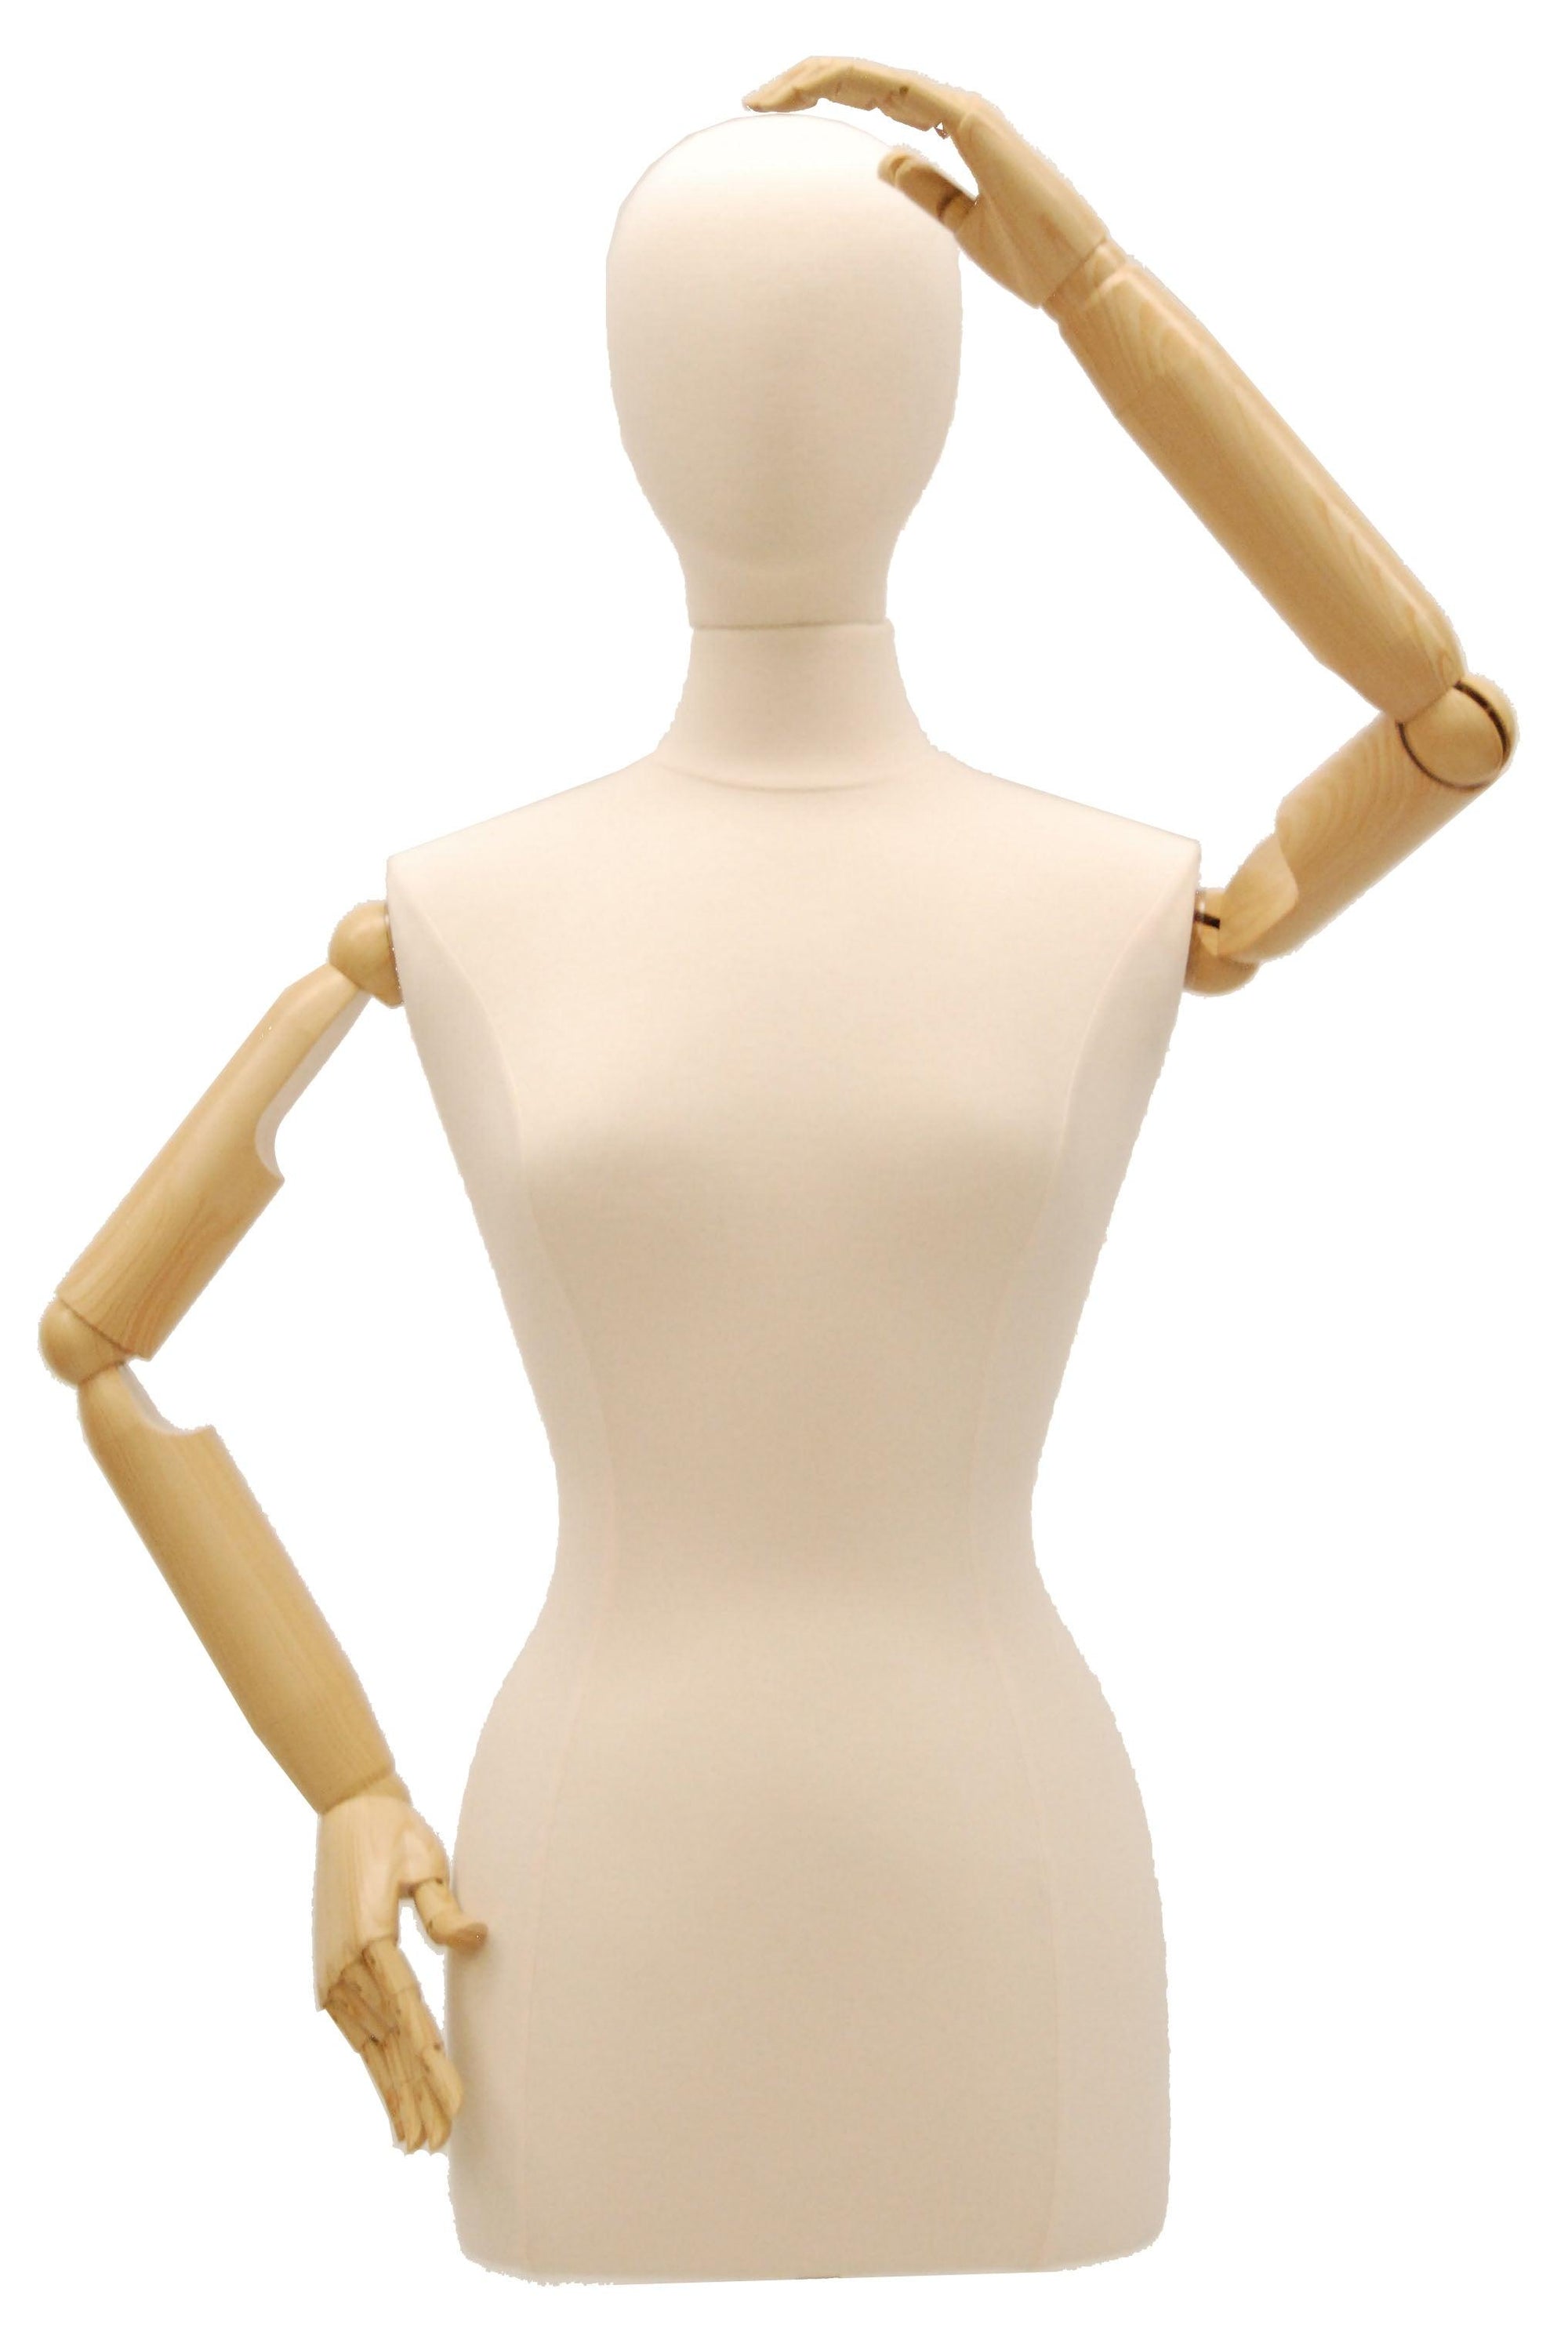 Female Display Dress Form with Arms and Head MM-JFF6/8WARM - Mannequin Mall